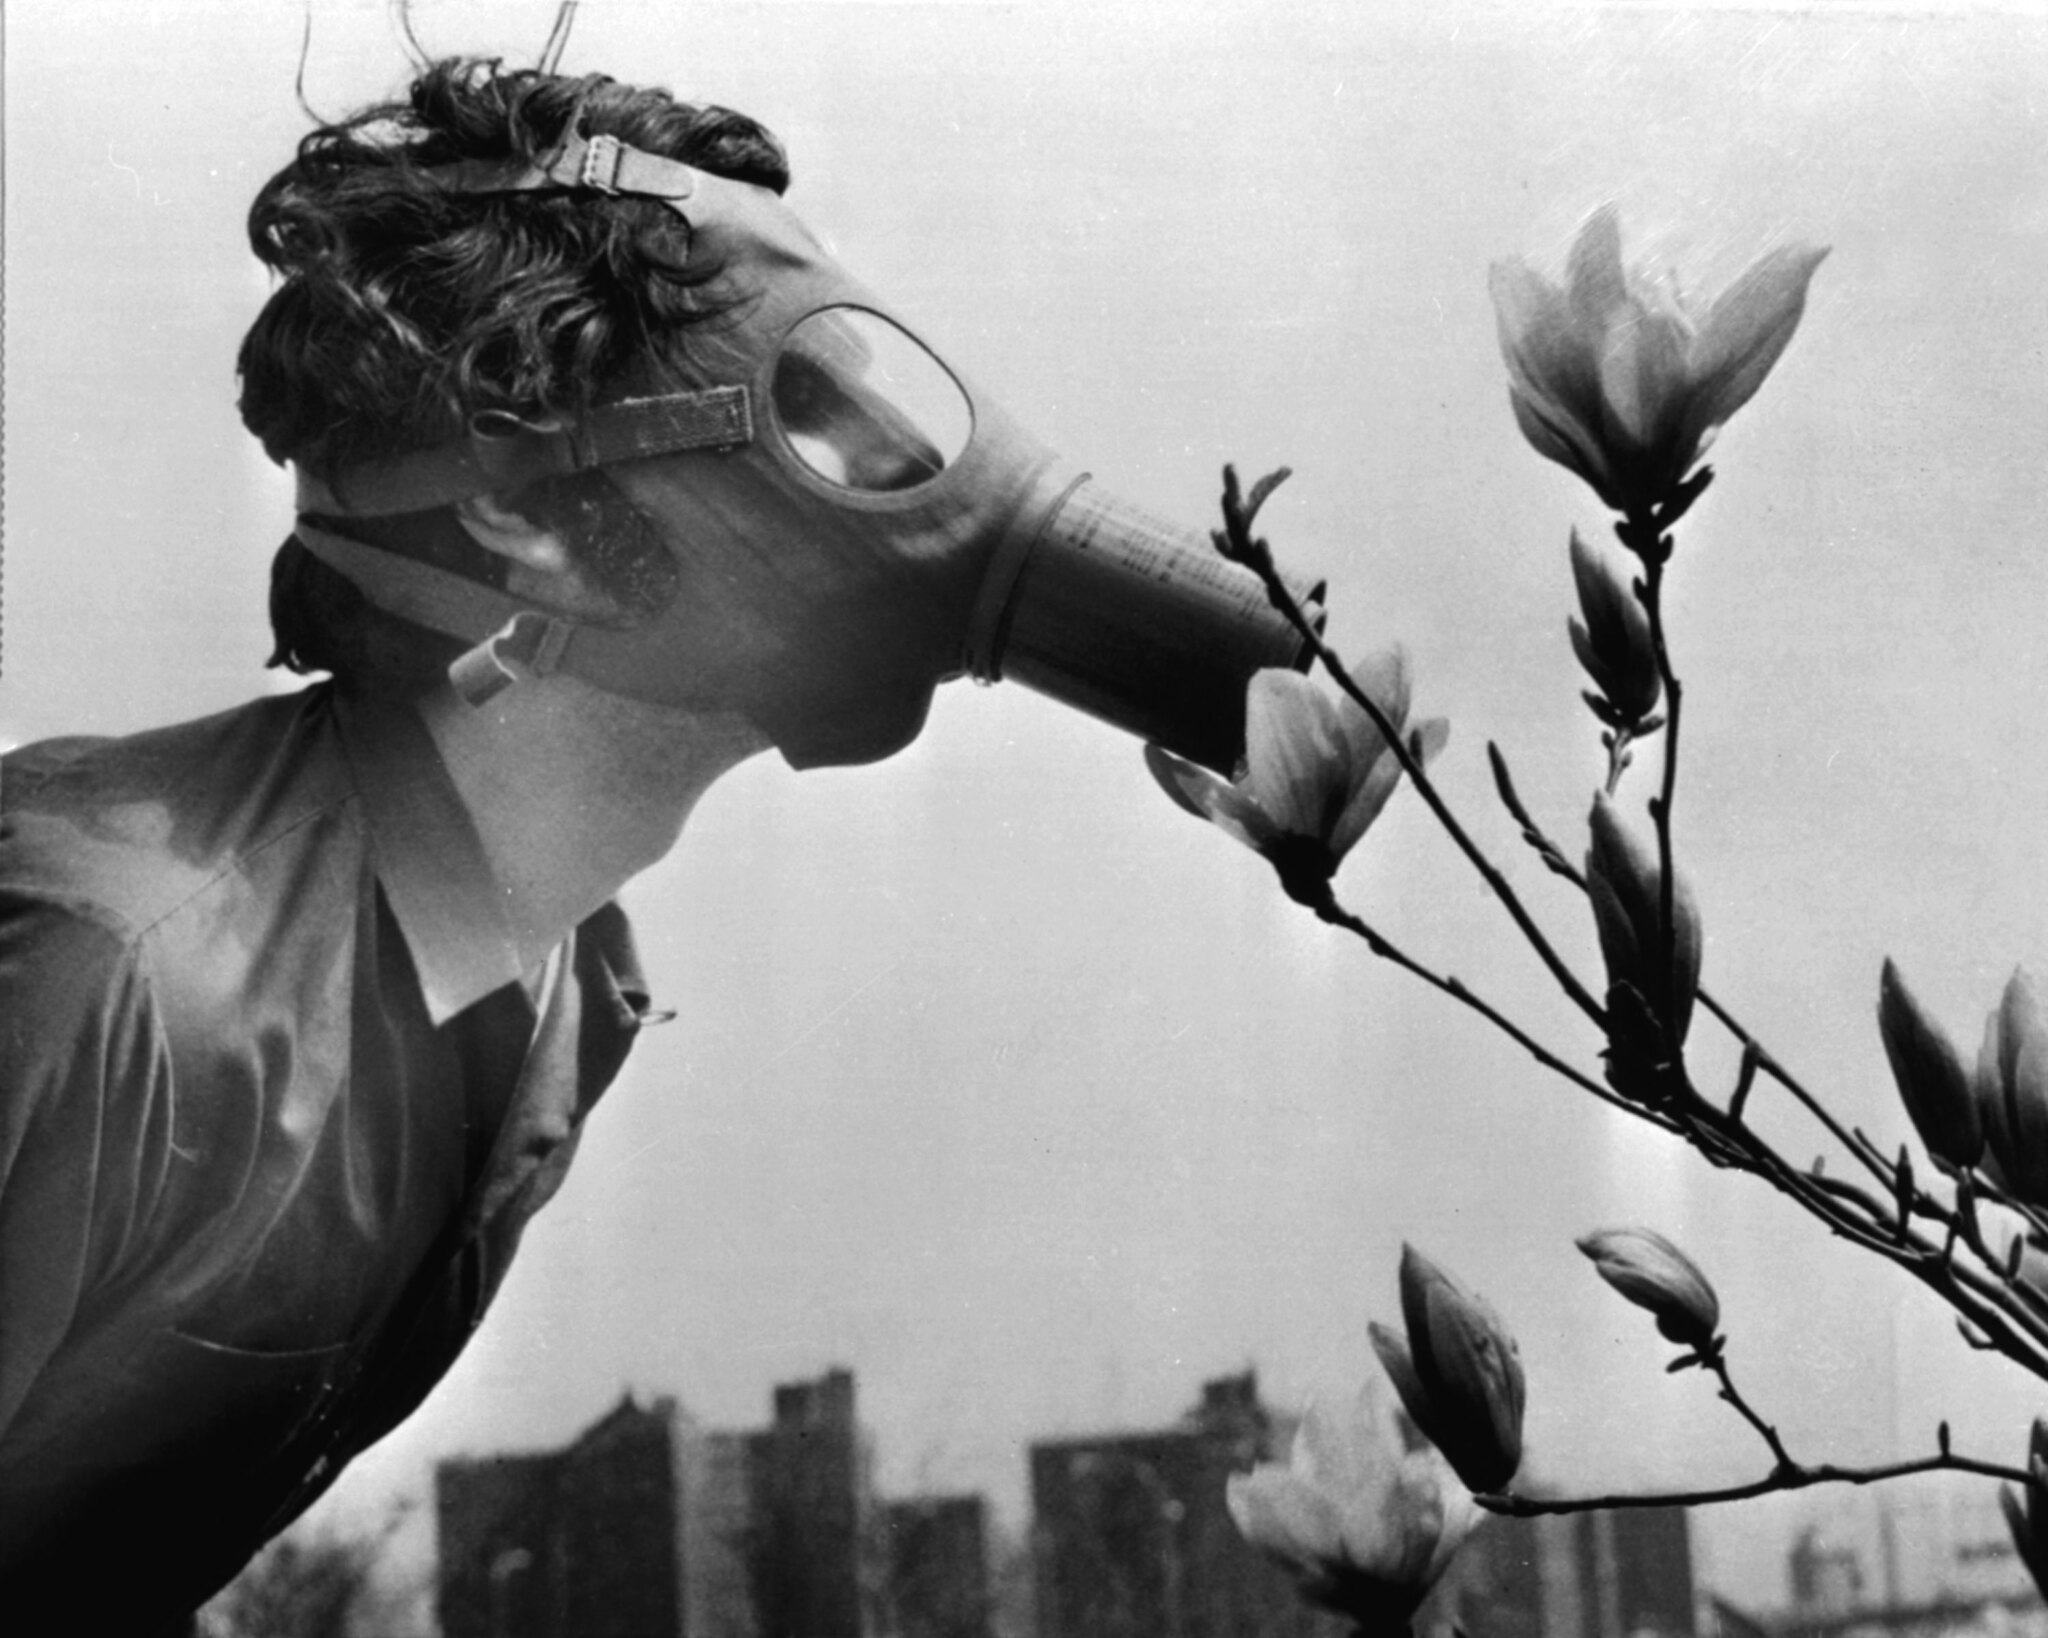 Pace college student in a gas mask “smells” a magnolia blossom in city hall park on earth day (April 22, 1970) in New York by Rogelio A. Galaviz C. on Flickr (CC BY-NC 2.0)